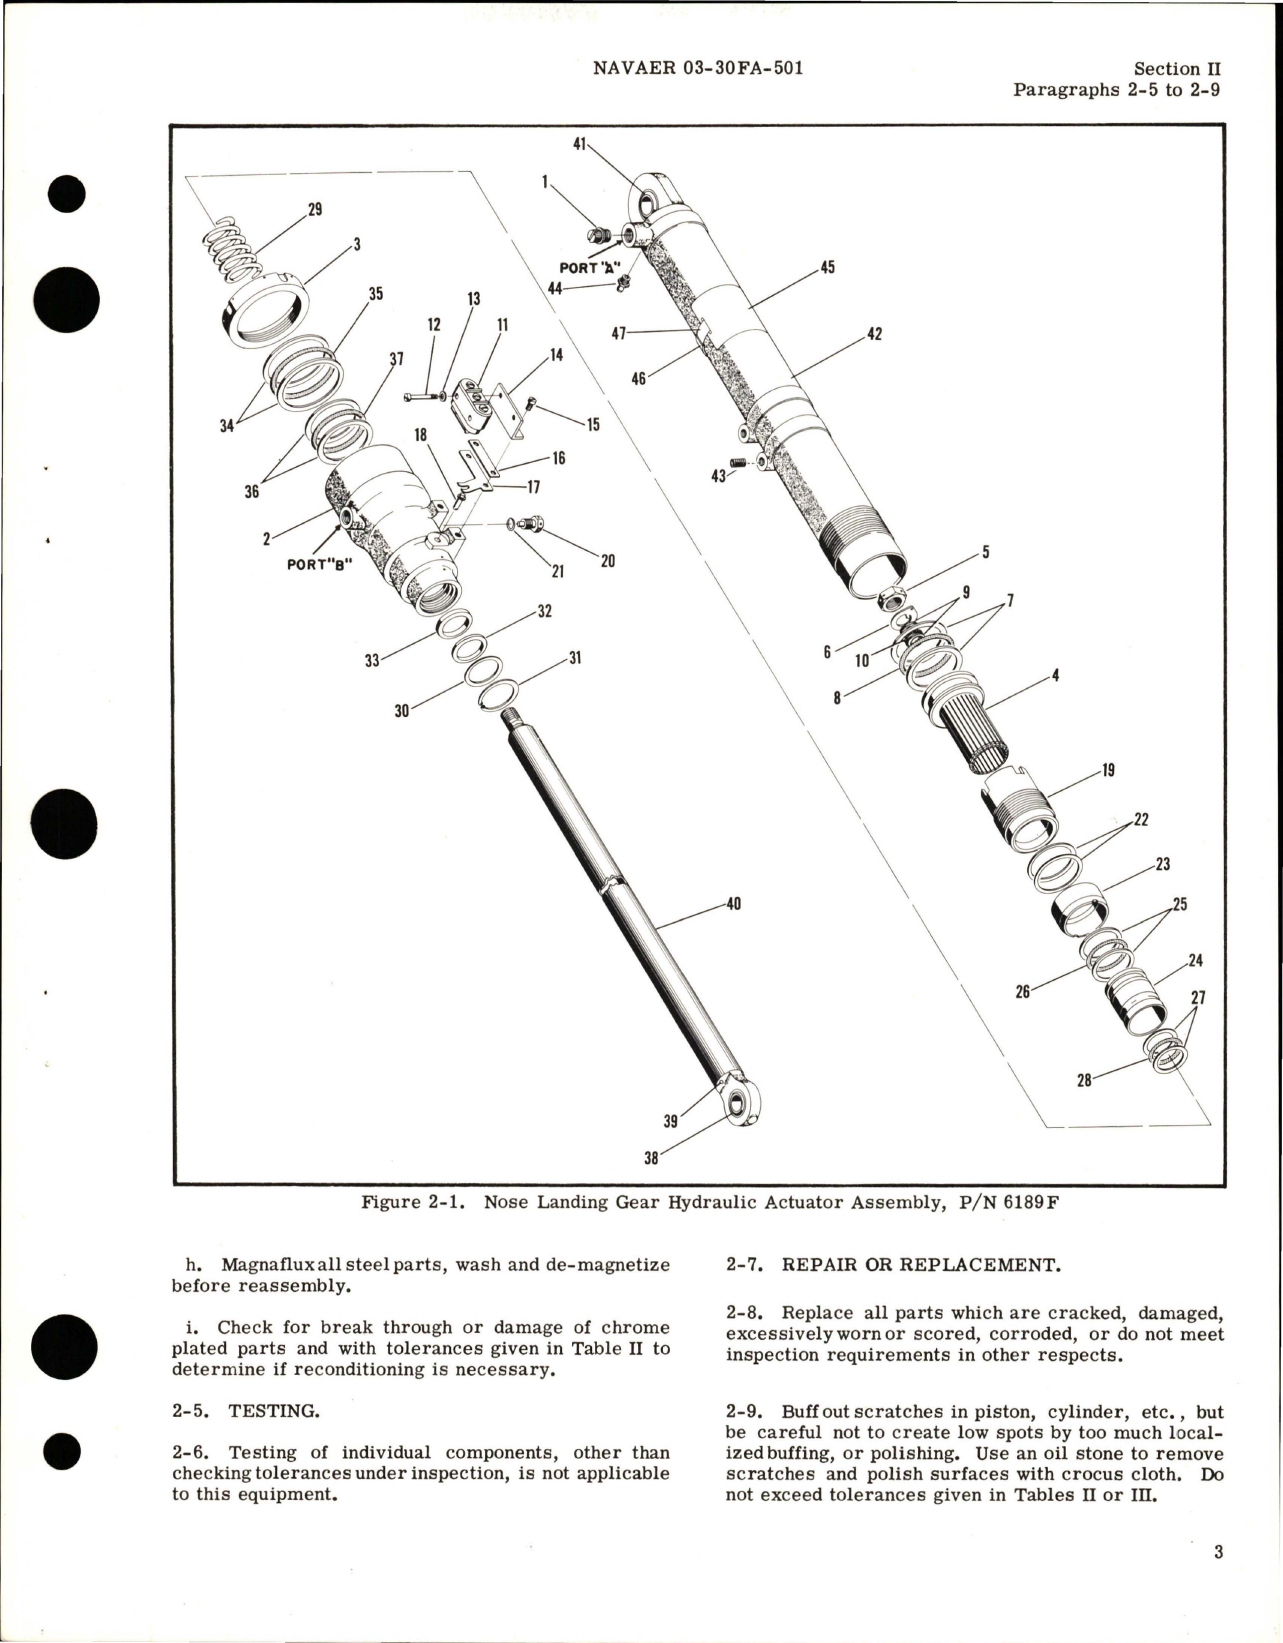 Sample page 5 from AirCorps Library document: Overhaul Instructions for Nose Landing Gear Hydraulic Actuator Assembly - Part 6189F